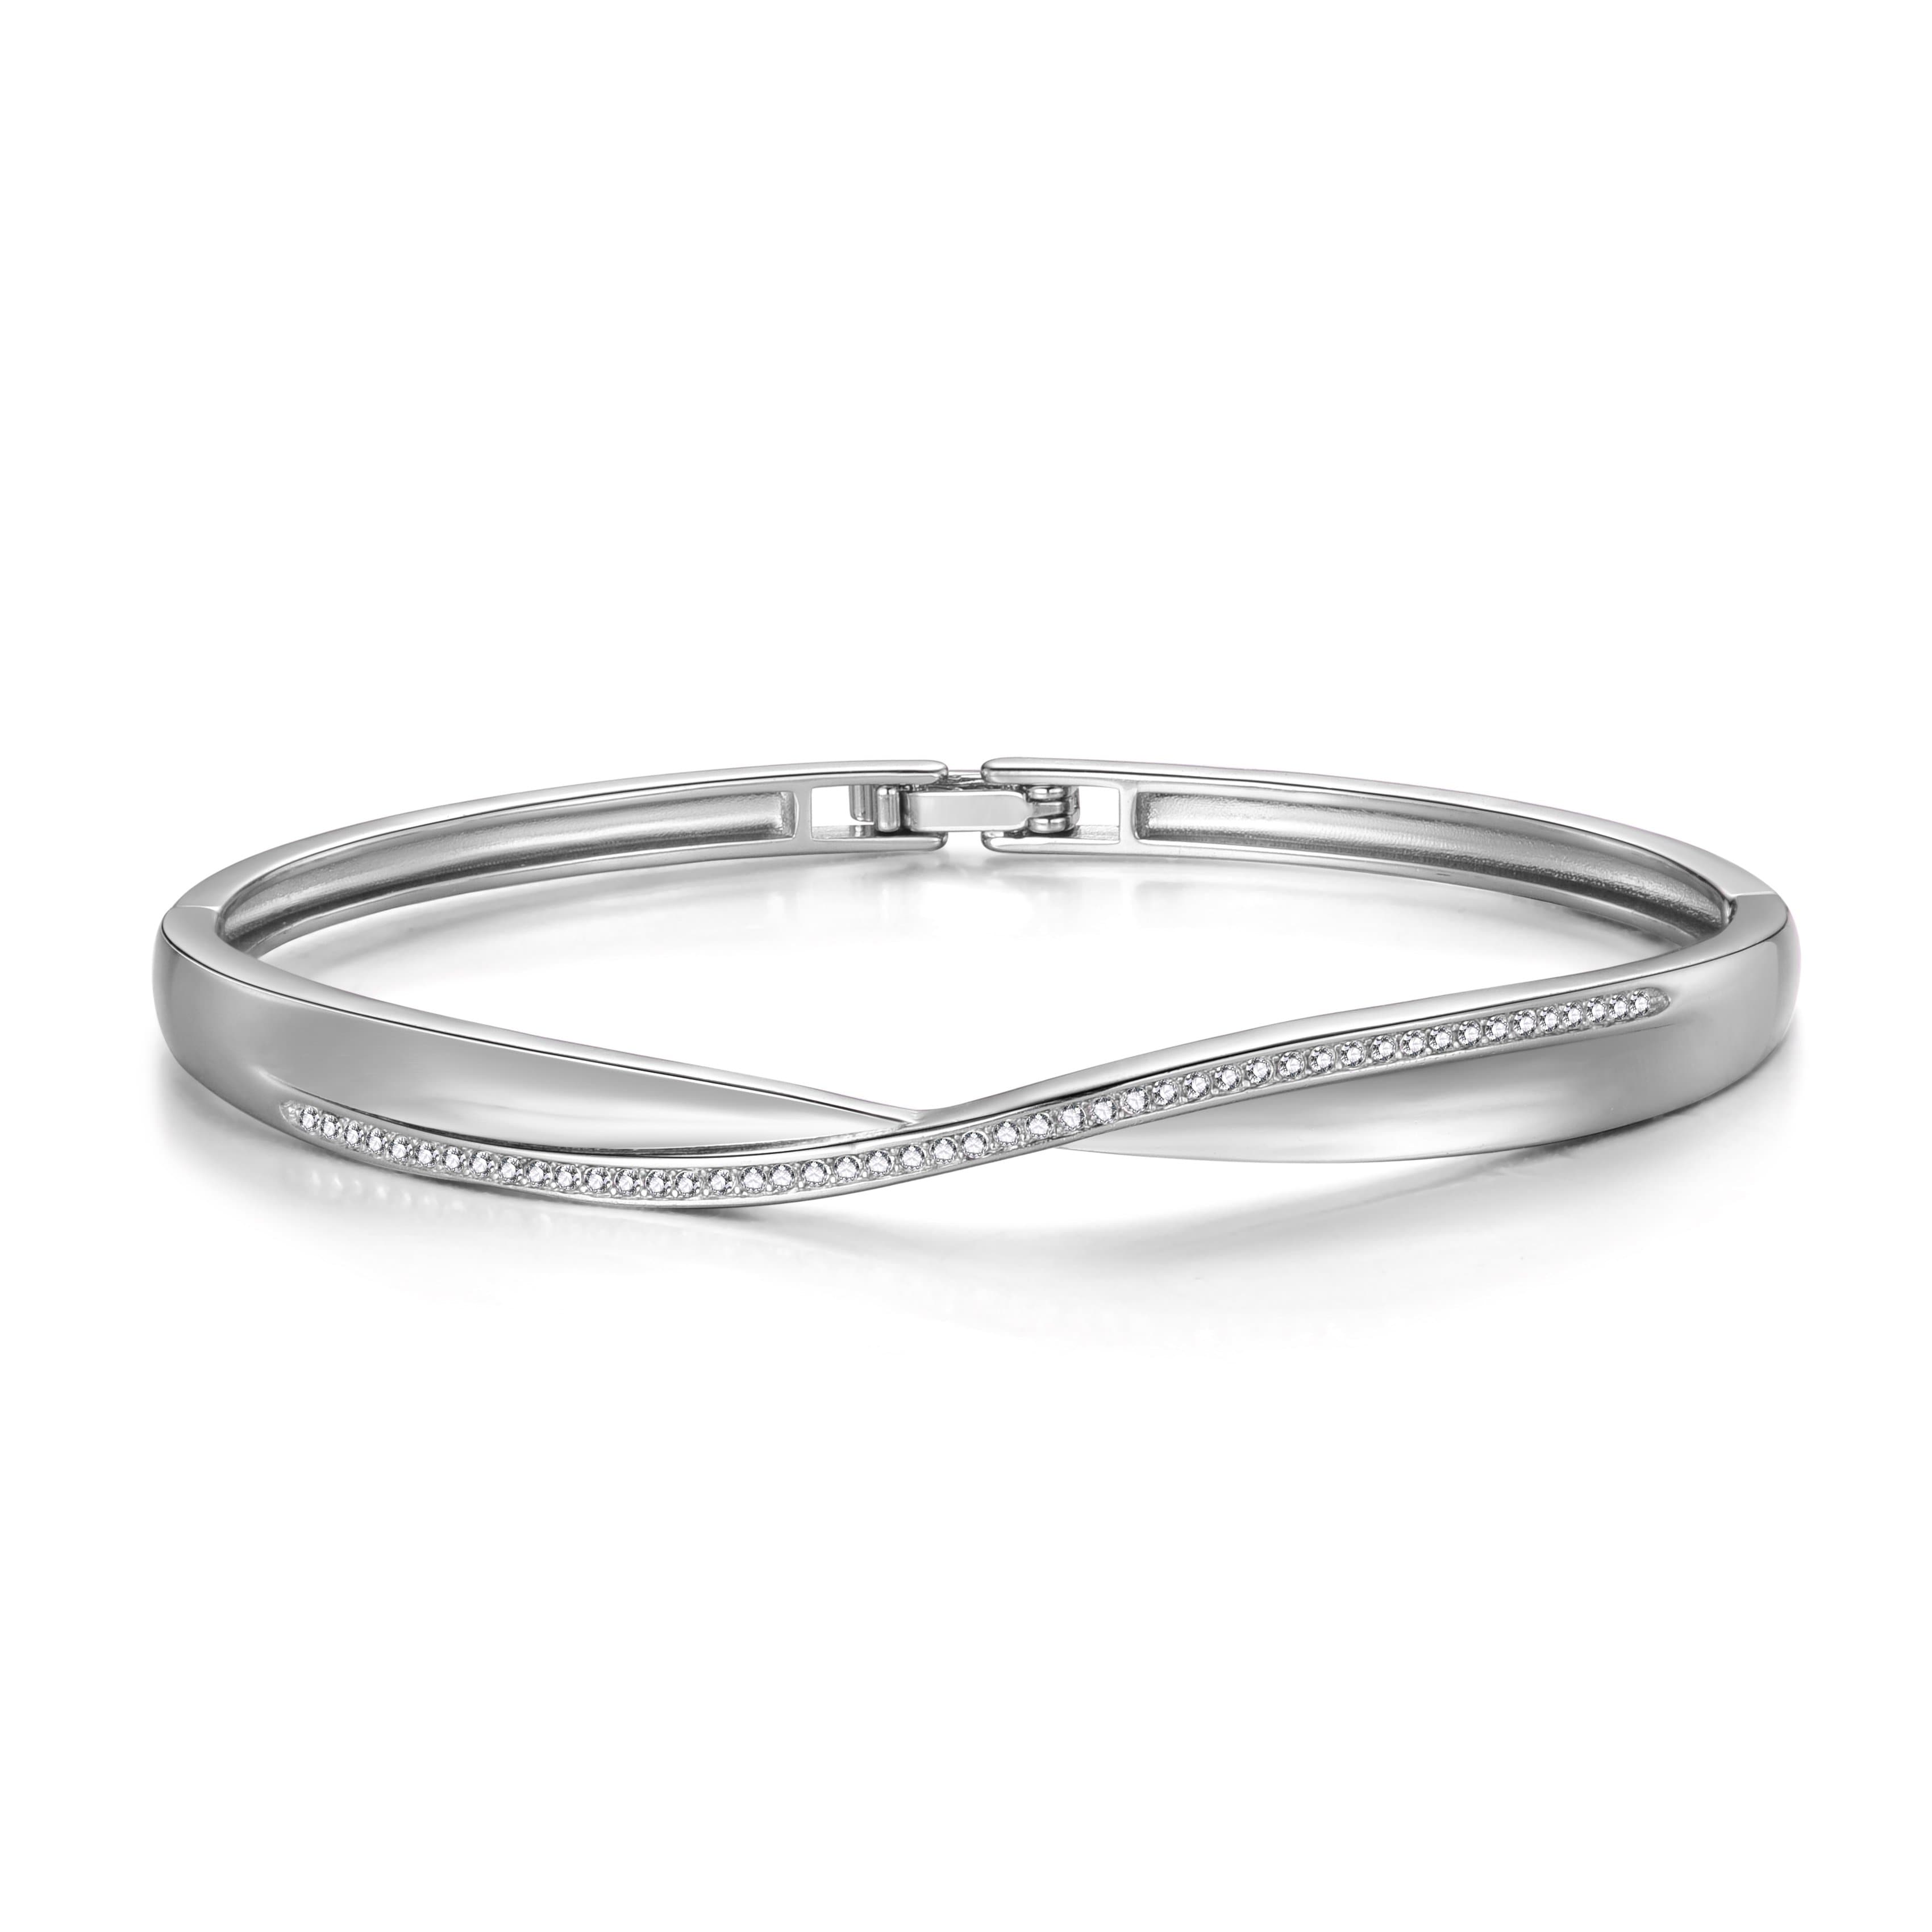 Silver Plated Arc Bangle Created with Zircondia® Crystals by Philip Jones Jewellery